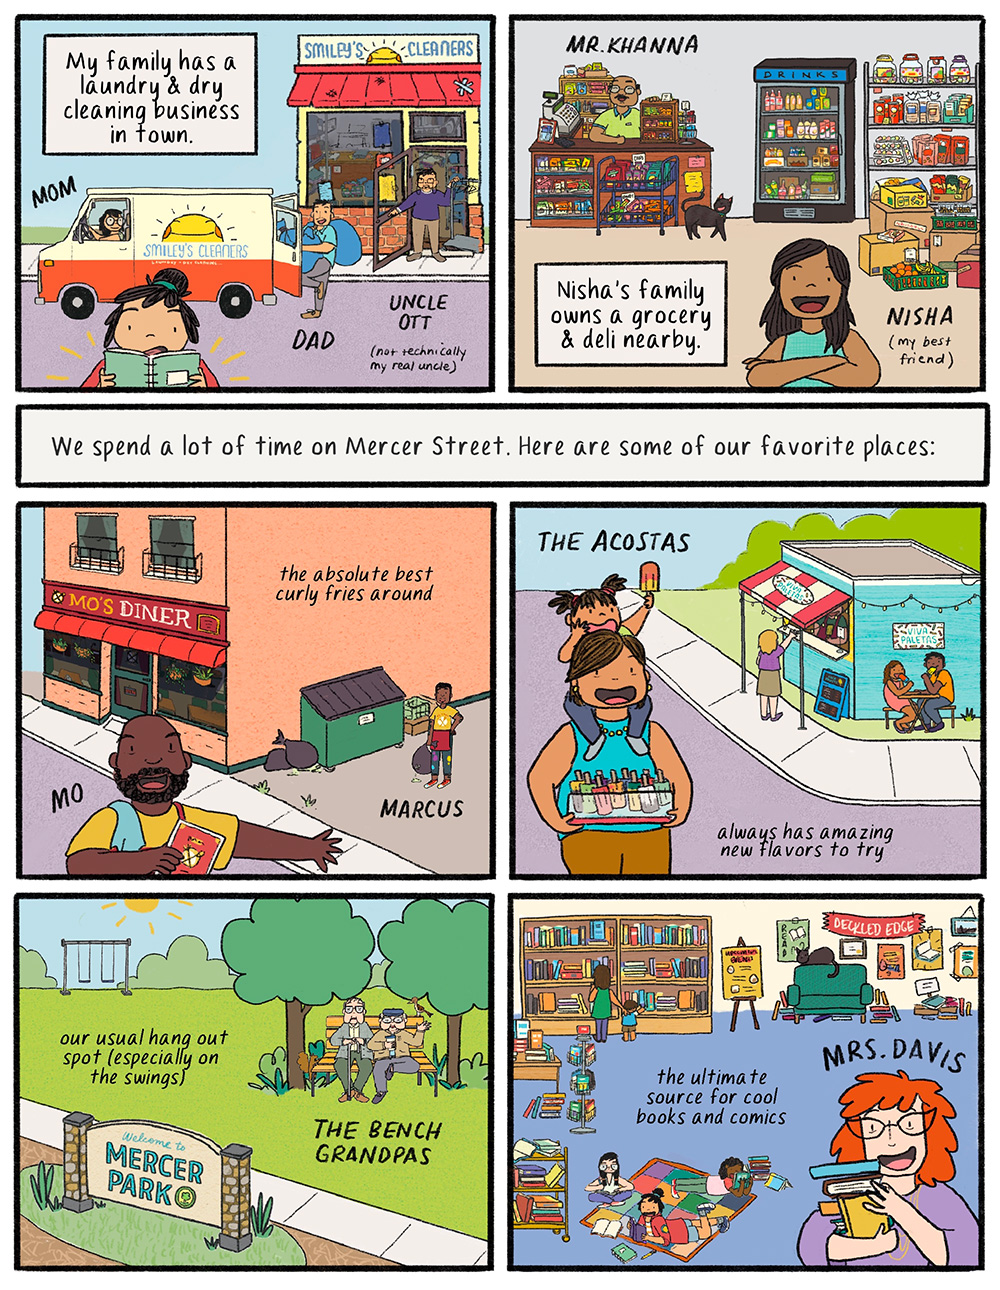 Six panel comic. Comic panel one shows Kacie looking into her sketchbook in front of Smiley's Cleaners. Her mom is driving a delivery truck, her dad is loading laundry bags into the bag. Her Uncle Ott is at the door, labeled (Not technically my real uncle) Text Reads: "My family has a laundry and dry cleaning business in town." 

Comic panel two shows Nisha, Kacie's best friend, standing her family's bodega. Text reads: "Nisha's family owns a grocery and deli nearby. Nisha is labeled as (my best friend) and Nisha's dad is standing behind the register. There is a black cat walking through the shop.

Text bubble below the first two panels reads: "We spend a lot of time on Mercer Street. Here are some of our favorite places:"

Comic panel three shows Mo's Diner, Mo and Marcus standing out front. Text reads "The absolute best curly fries around."
Comic panel four shows The Acostas standing in front of their popsicle stand with customers sitting at a table eating popsicles. Text reads "Always has amazing new flavors to try."
Comic panel five shows Mercer Park with a swing set, trees, and The Bench Grandpas sitting on a bench. Text reads "Our usual hang out spot (especially on the swings)"
Comic panel six shows the interior of The Deckled Edge bookshop with Mrs. Davis holding a stack of books. There are kids looking at bookshelves and a few others laying around on a blanket reading. There is a black cat laying on a couch. Text reads "The ultimate source for cool books and comics."